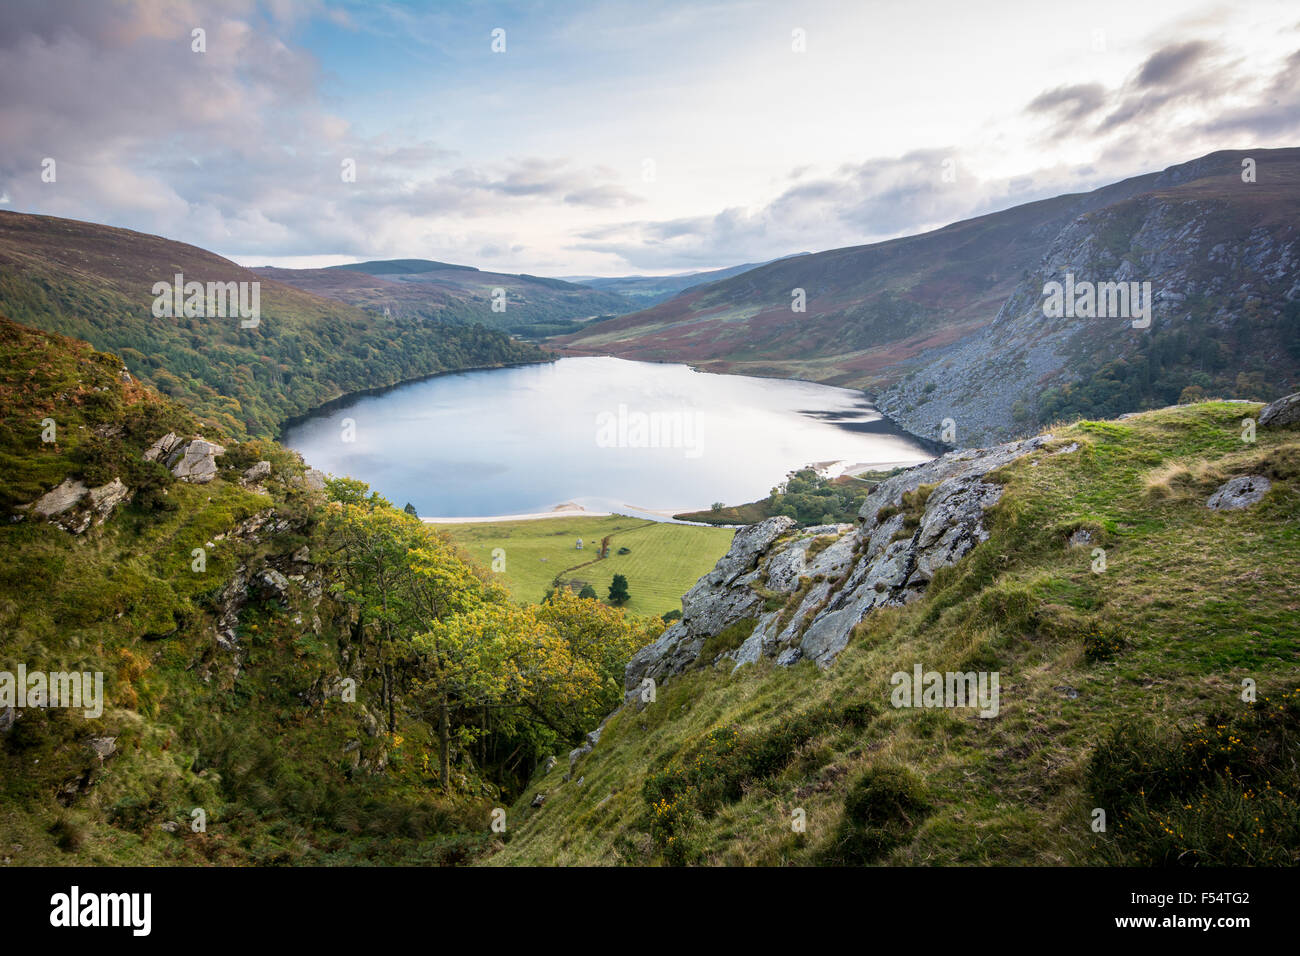 View of Lough Tay (Guinness Lake) and Luggala in the Wicklow Mountains, Ireland Stock Photo